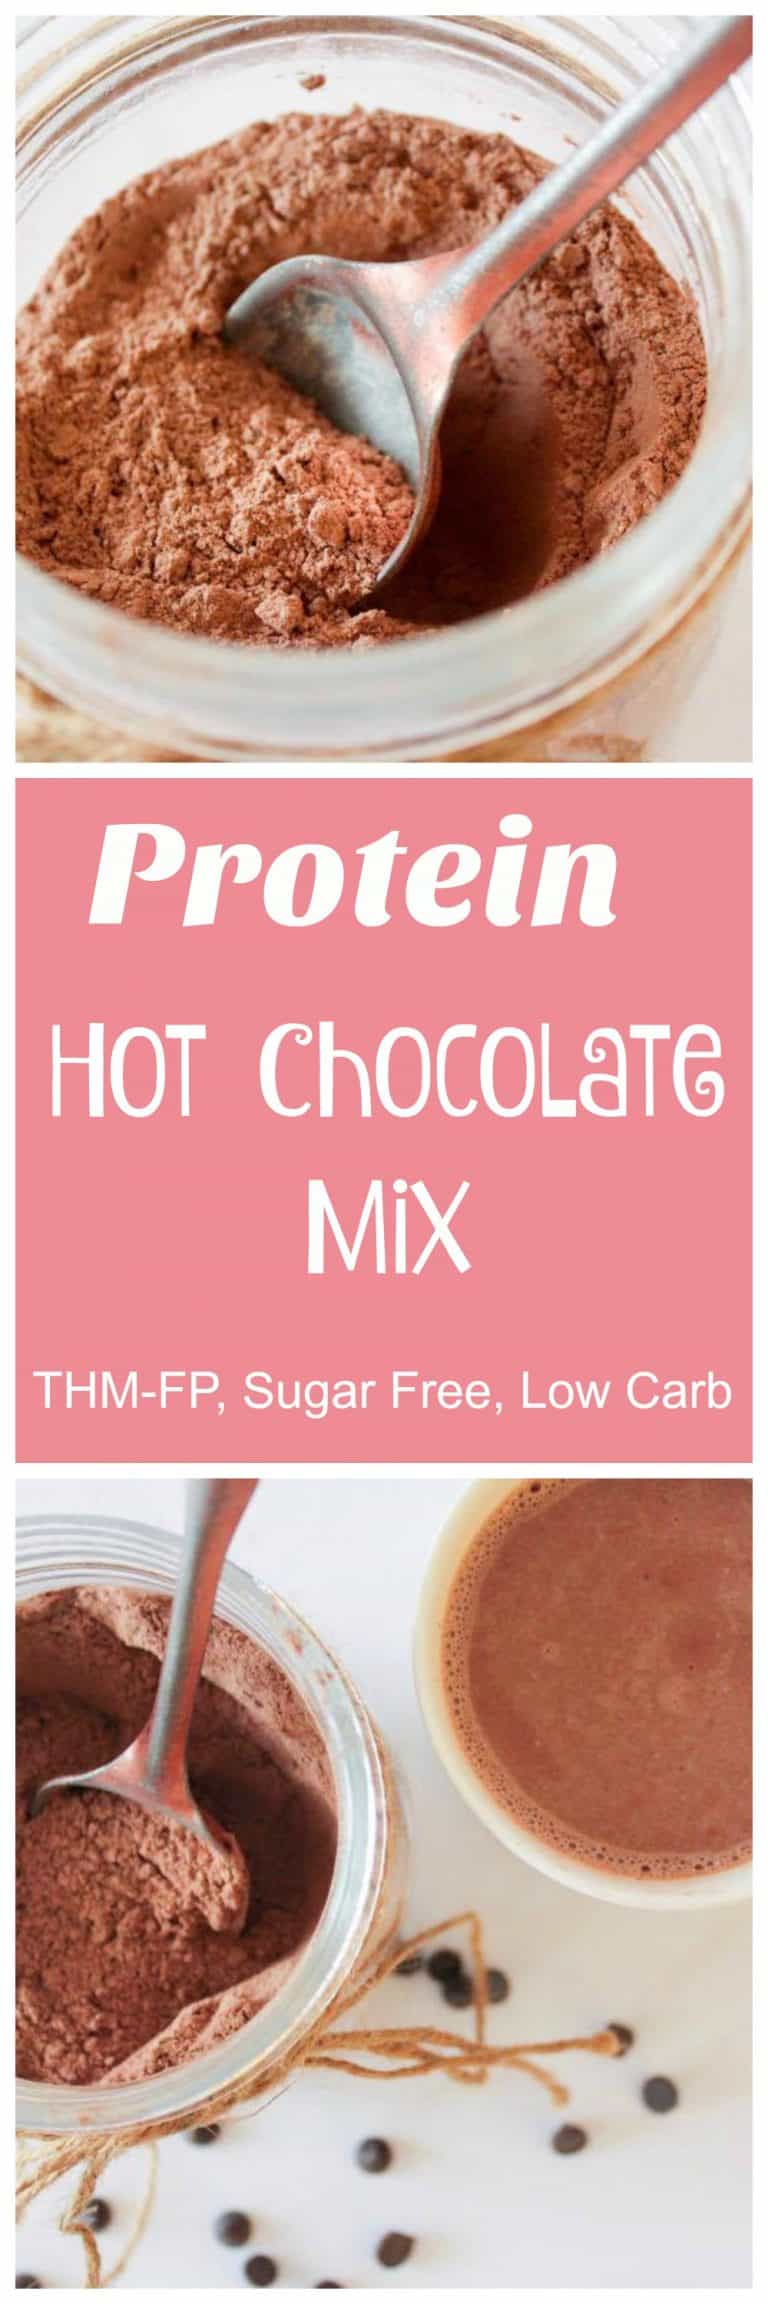 Protein Hot Chocolate Mix (THM-FP, Sugar Free, Low Carb)